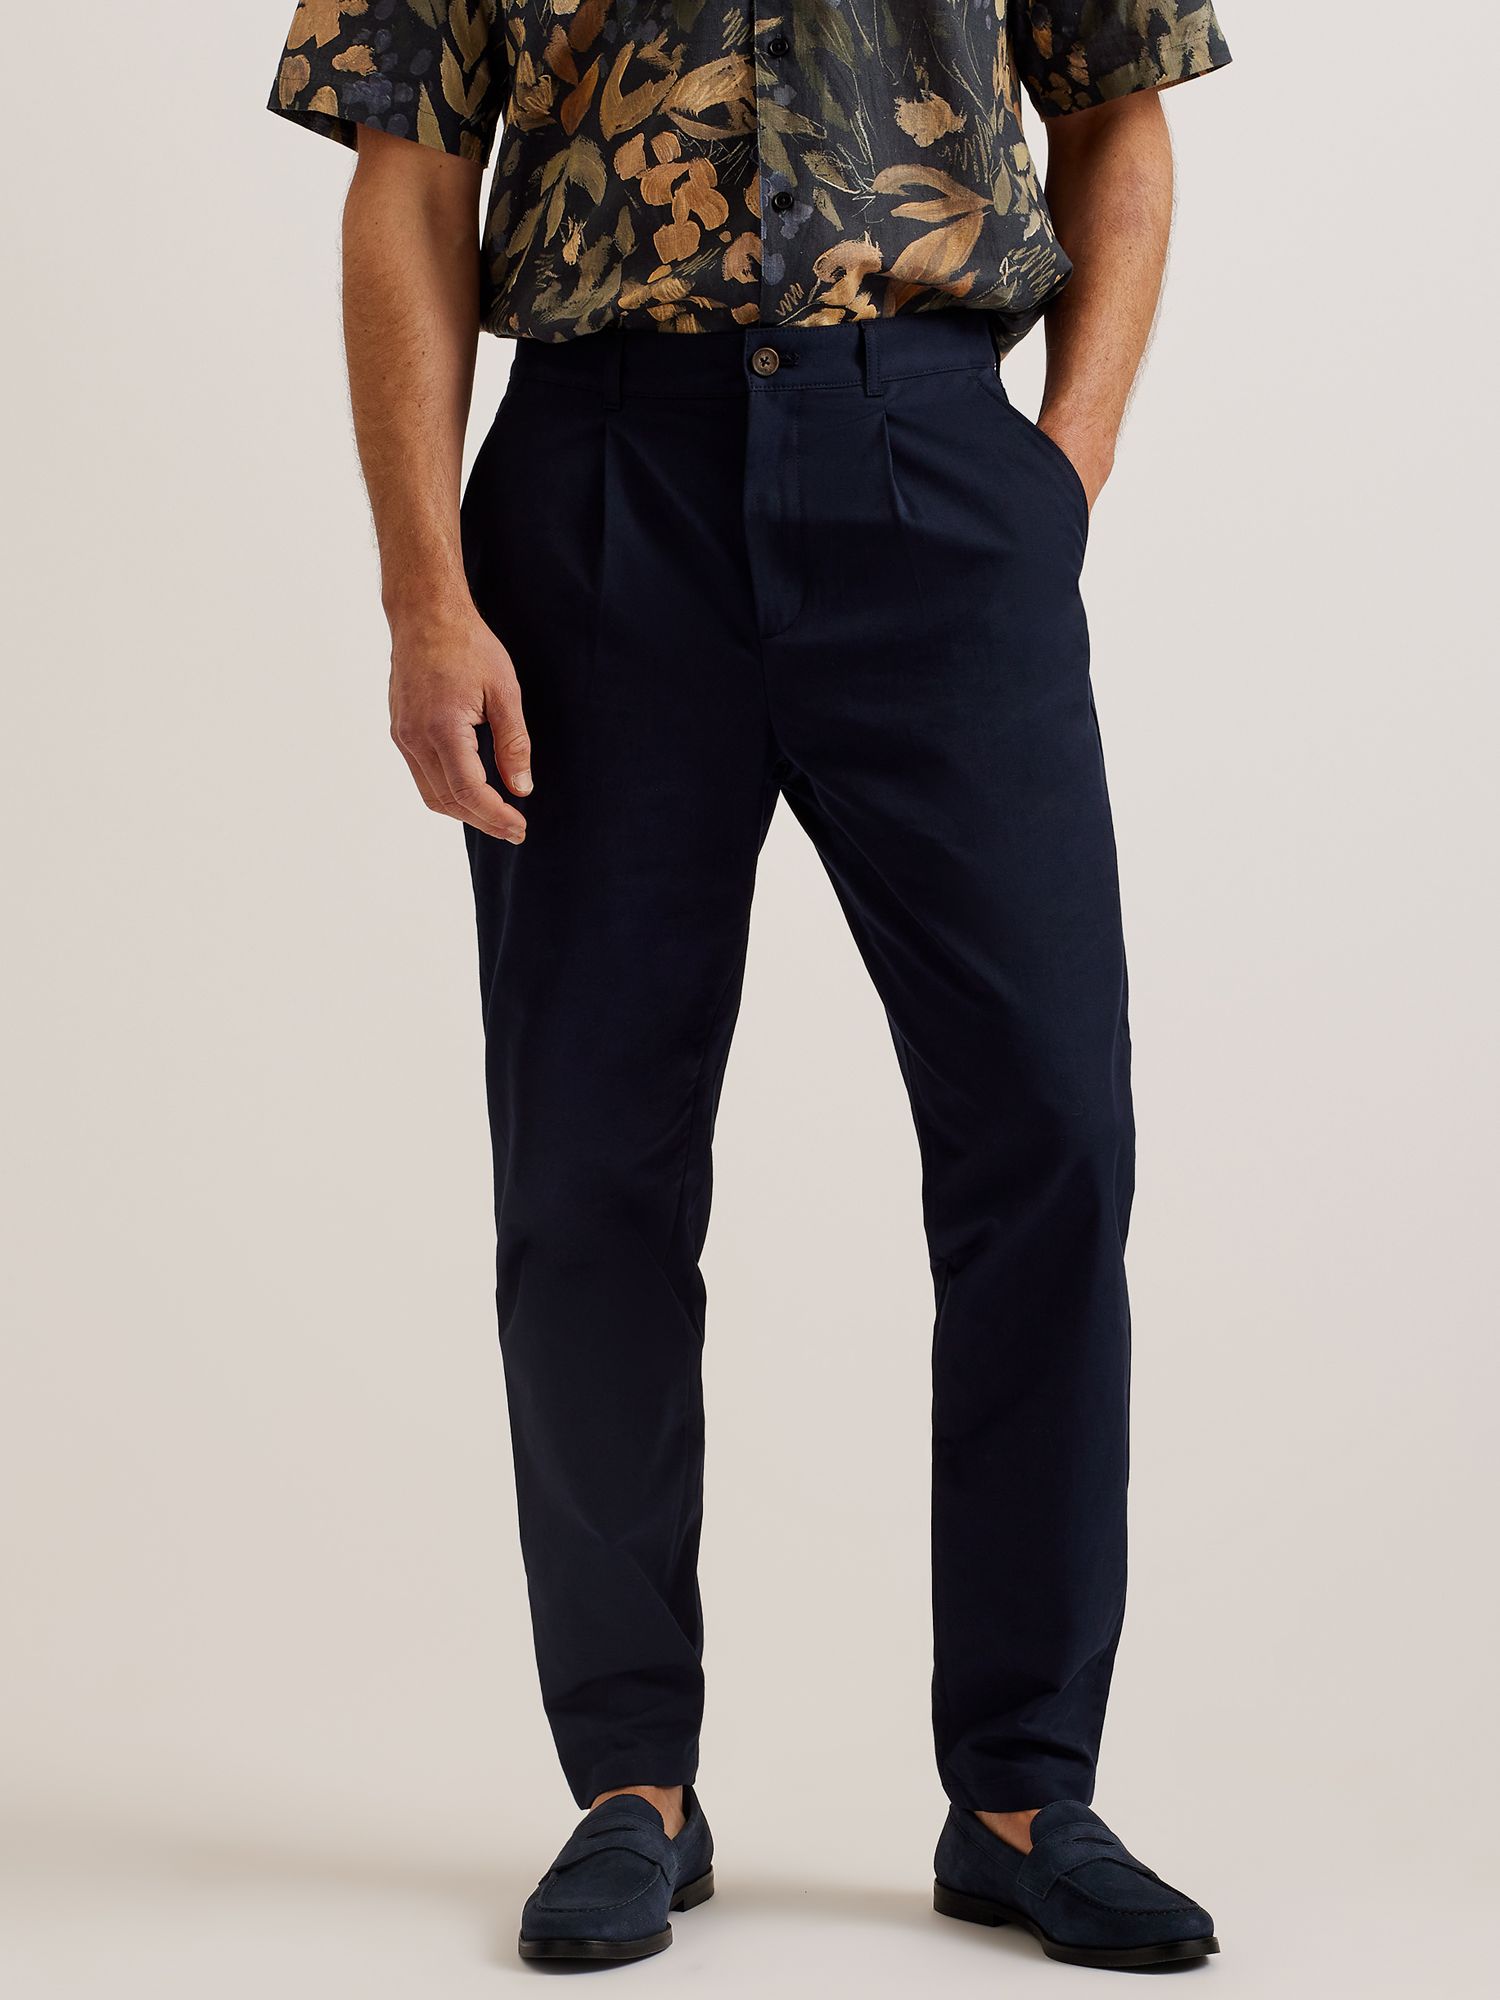 Blue Chinos Outfits  Navy Chino by Paul Brown